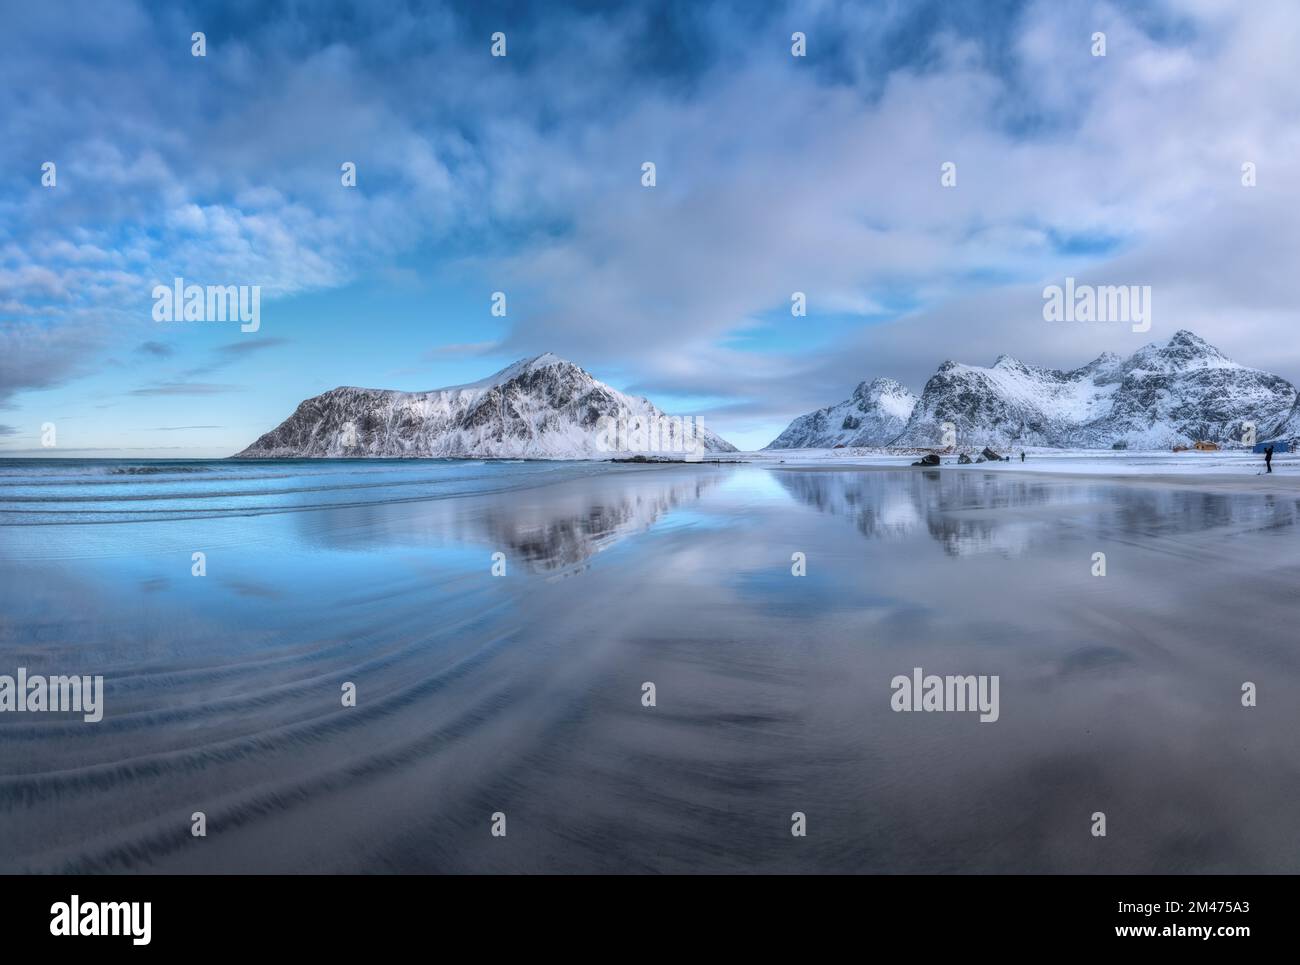 Sandy beach with blue sea reflected in water and rocks in snow Stock Photo